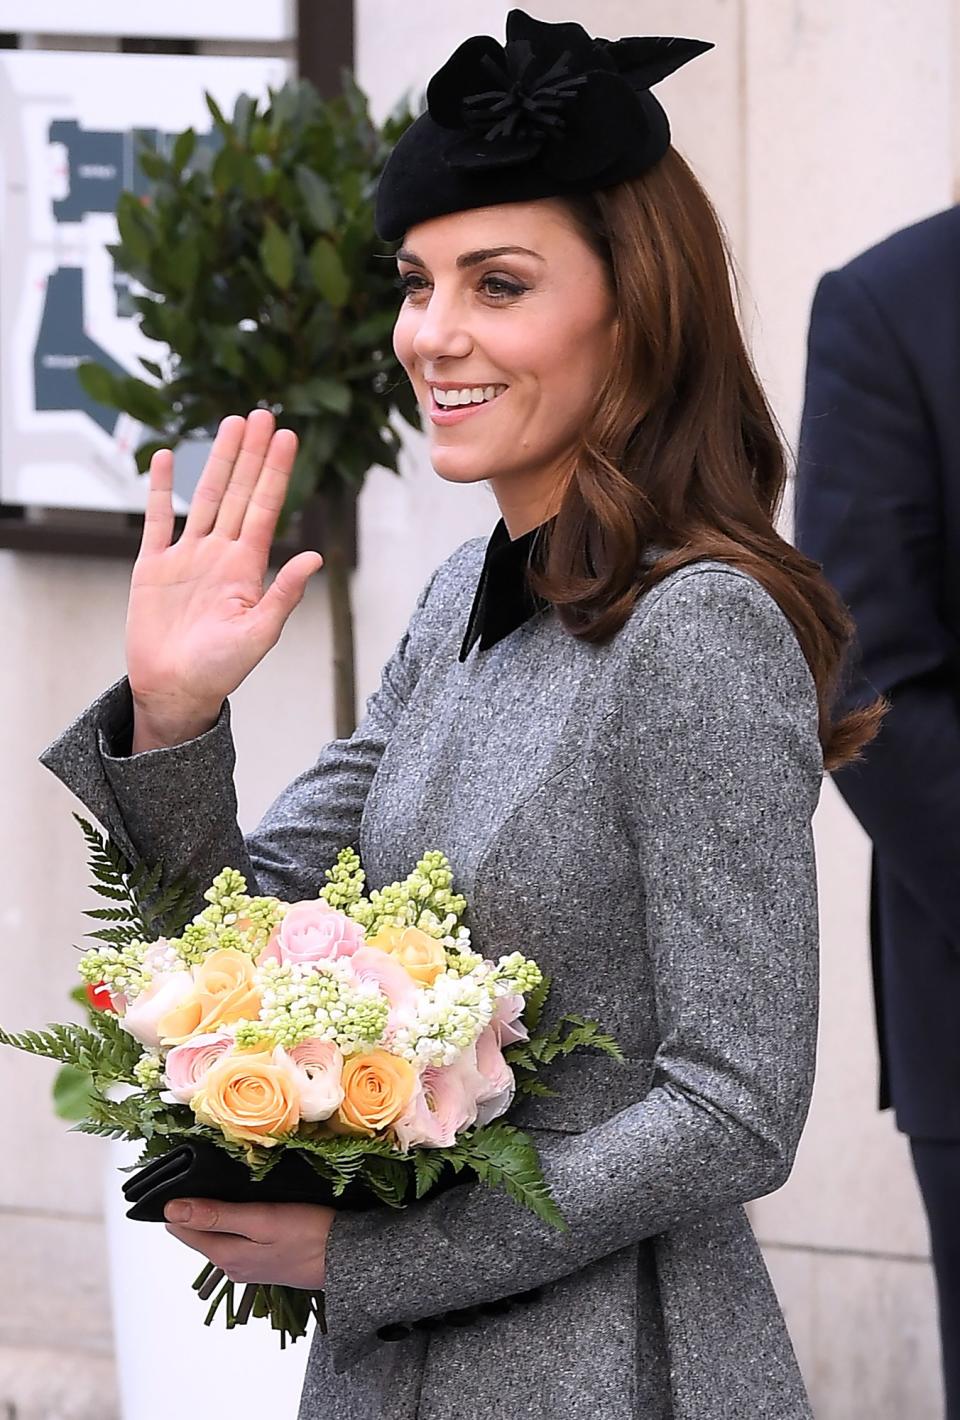 Kate Middleton to Represent Royal Family at Anzac Service